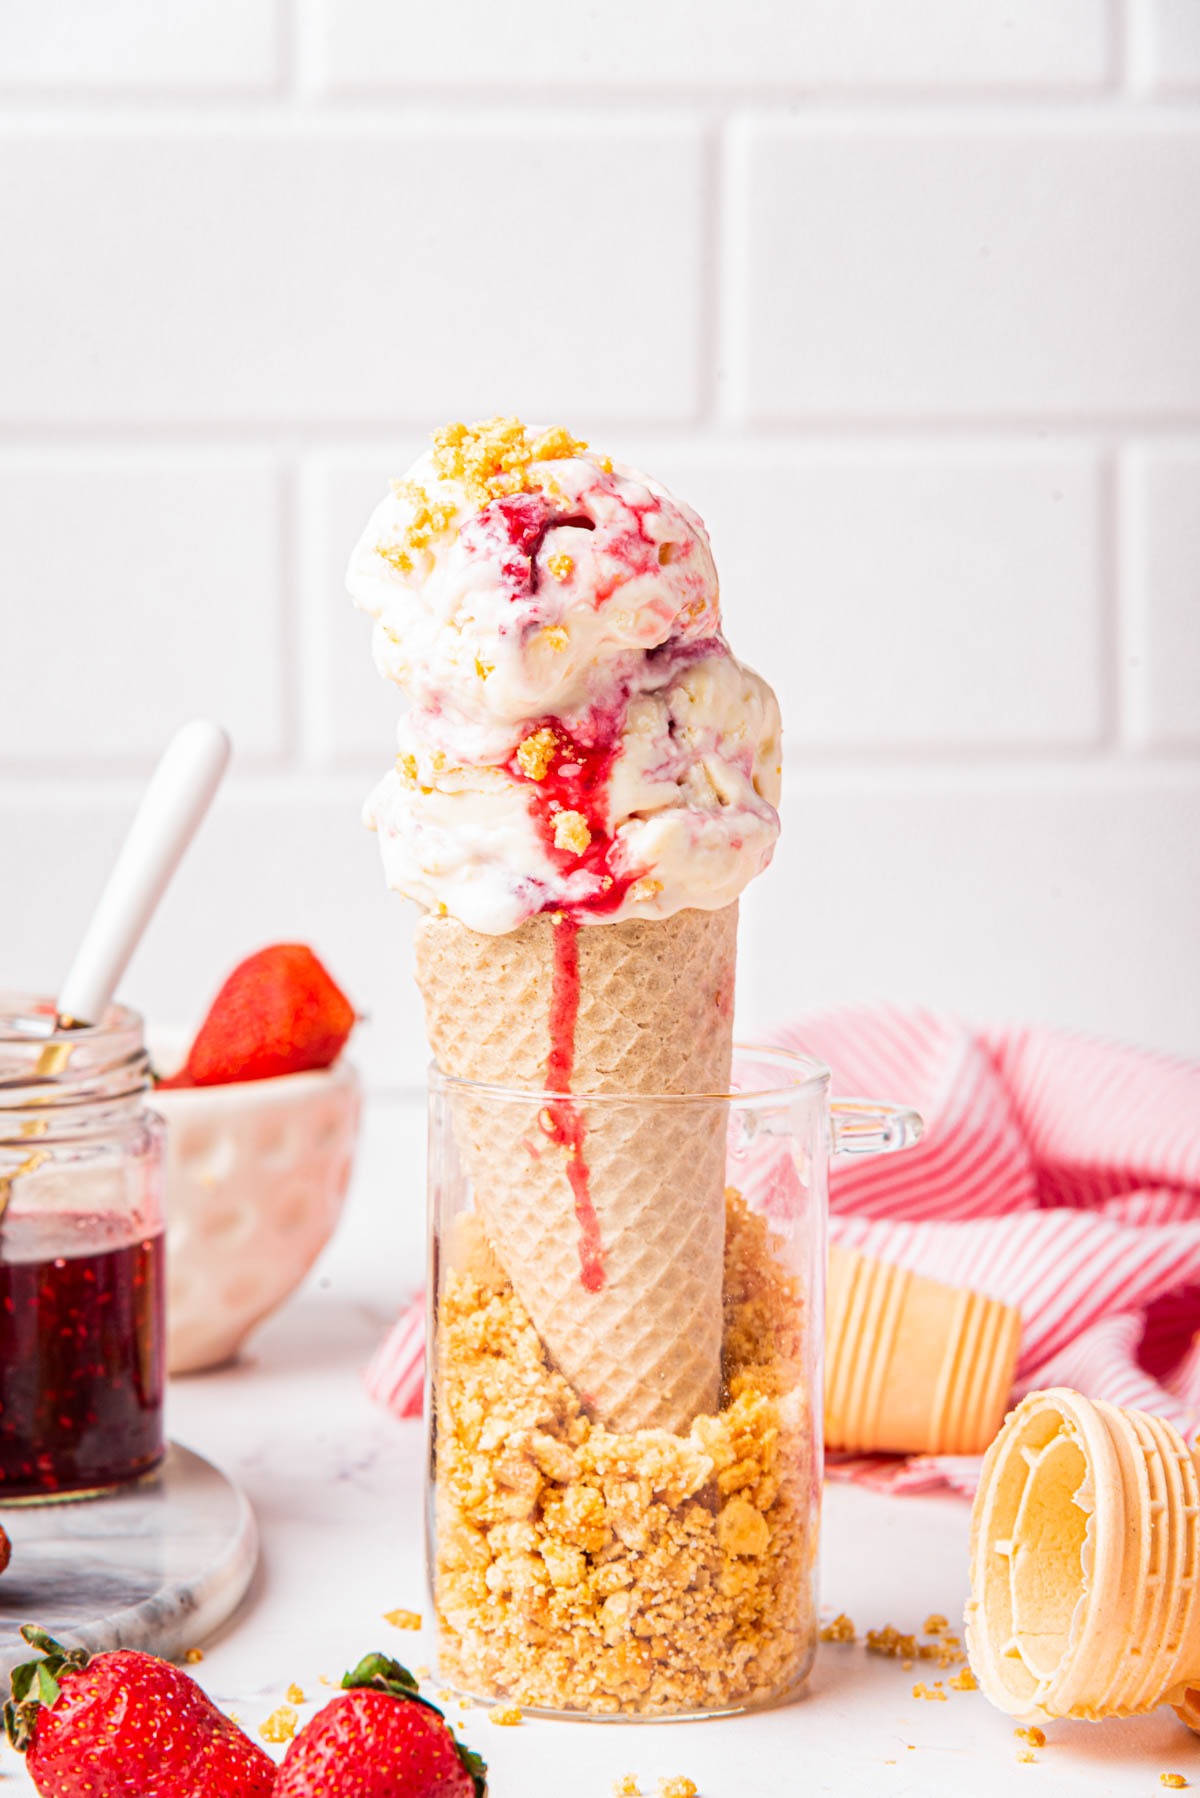 Close-up of strawberry cheesecake ice cream served in a sugar cone with jam and graham cracker crumbs, with a background of strawberries and a striped napkin.